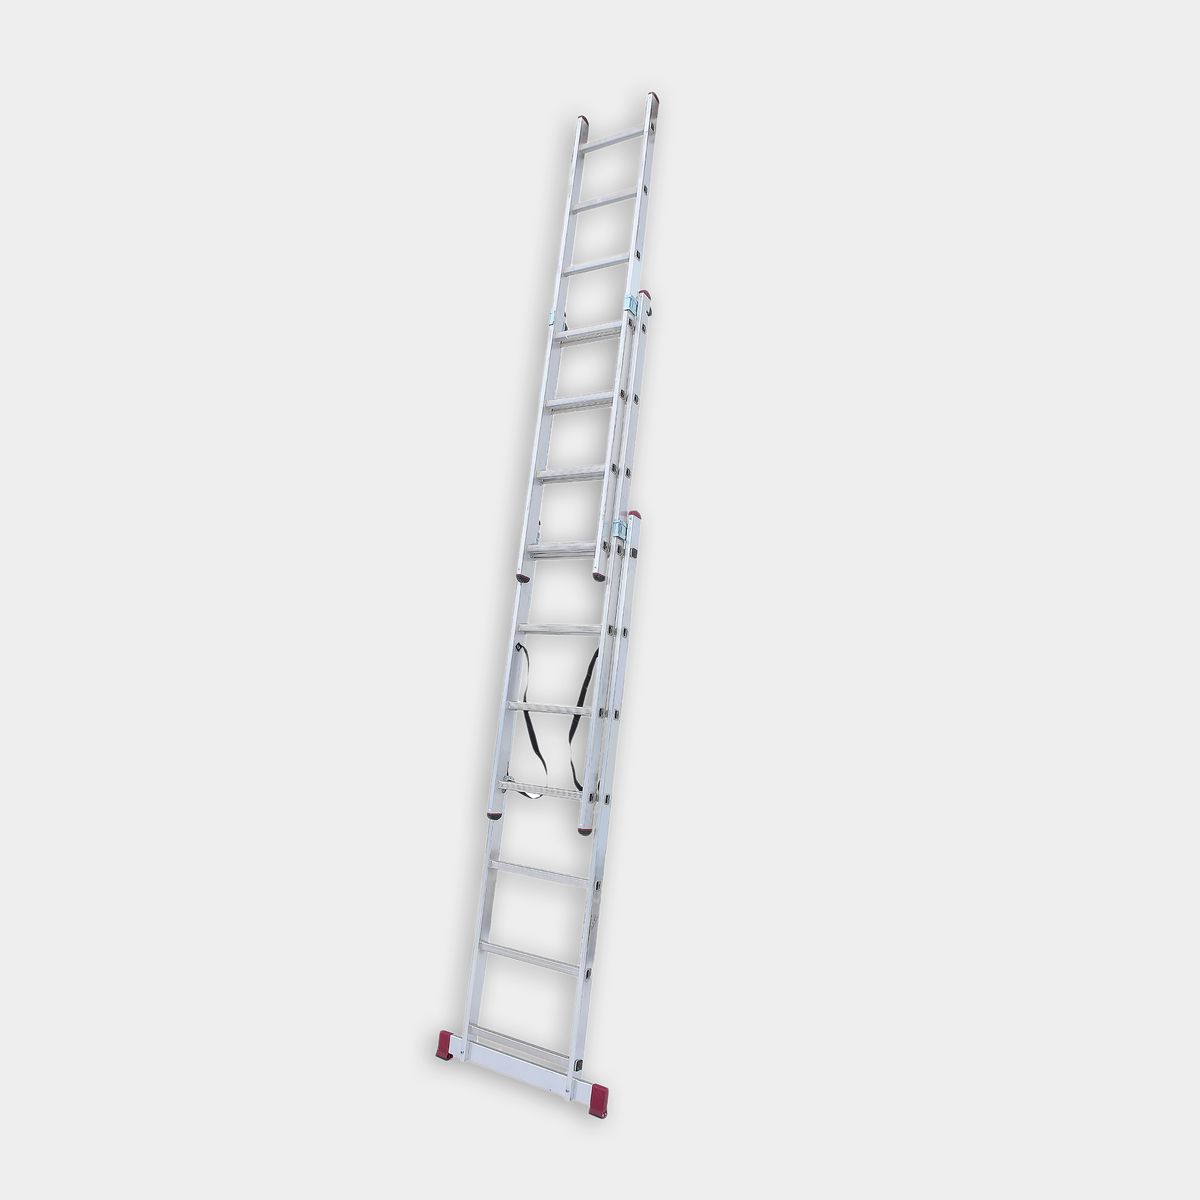 A large extension ladder